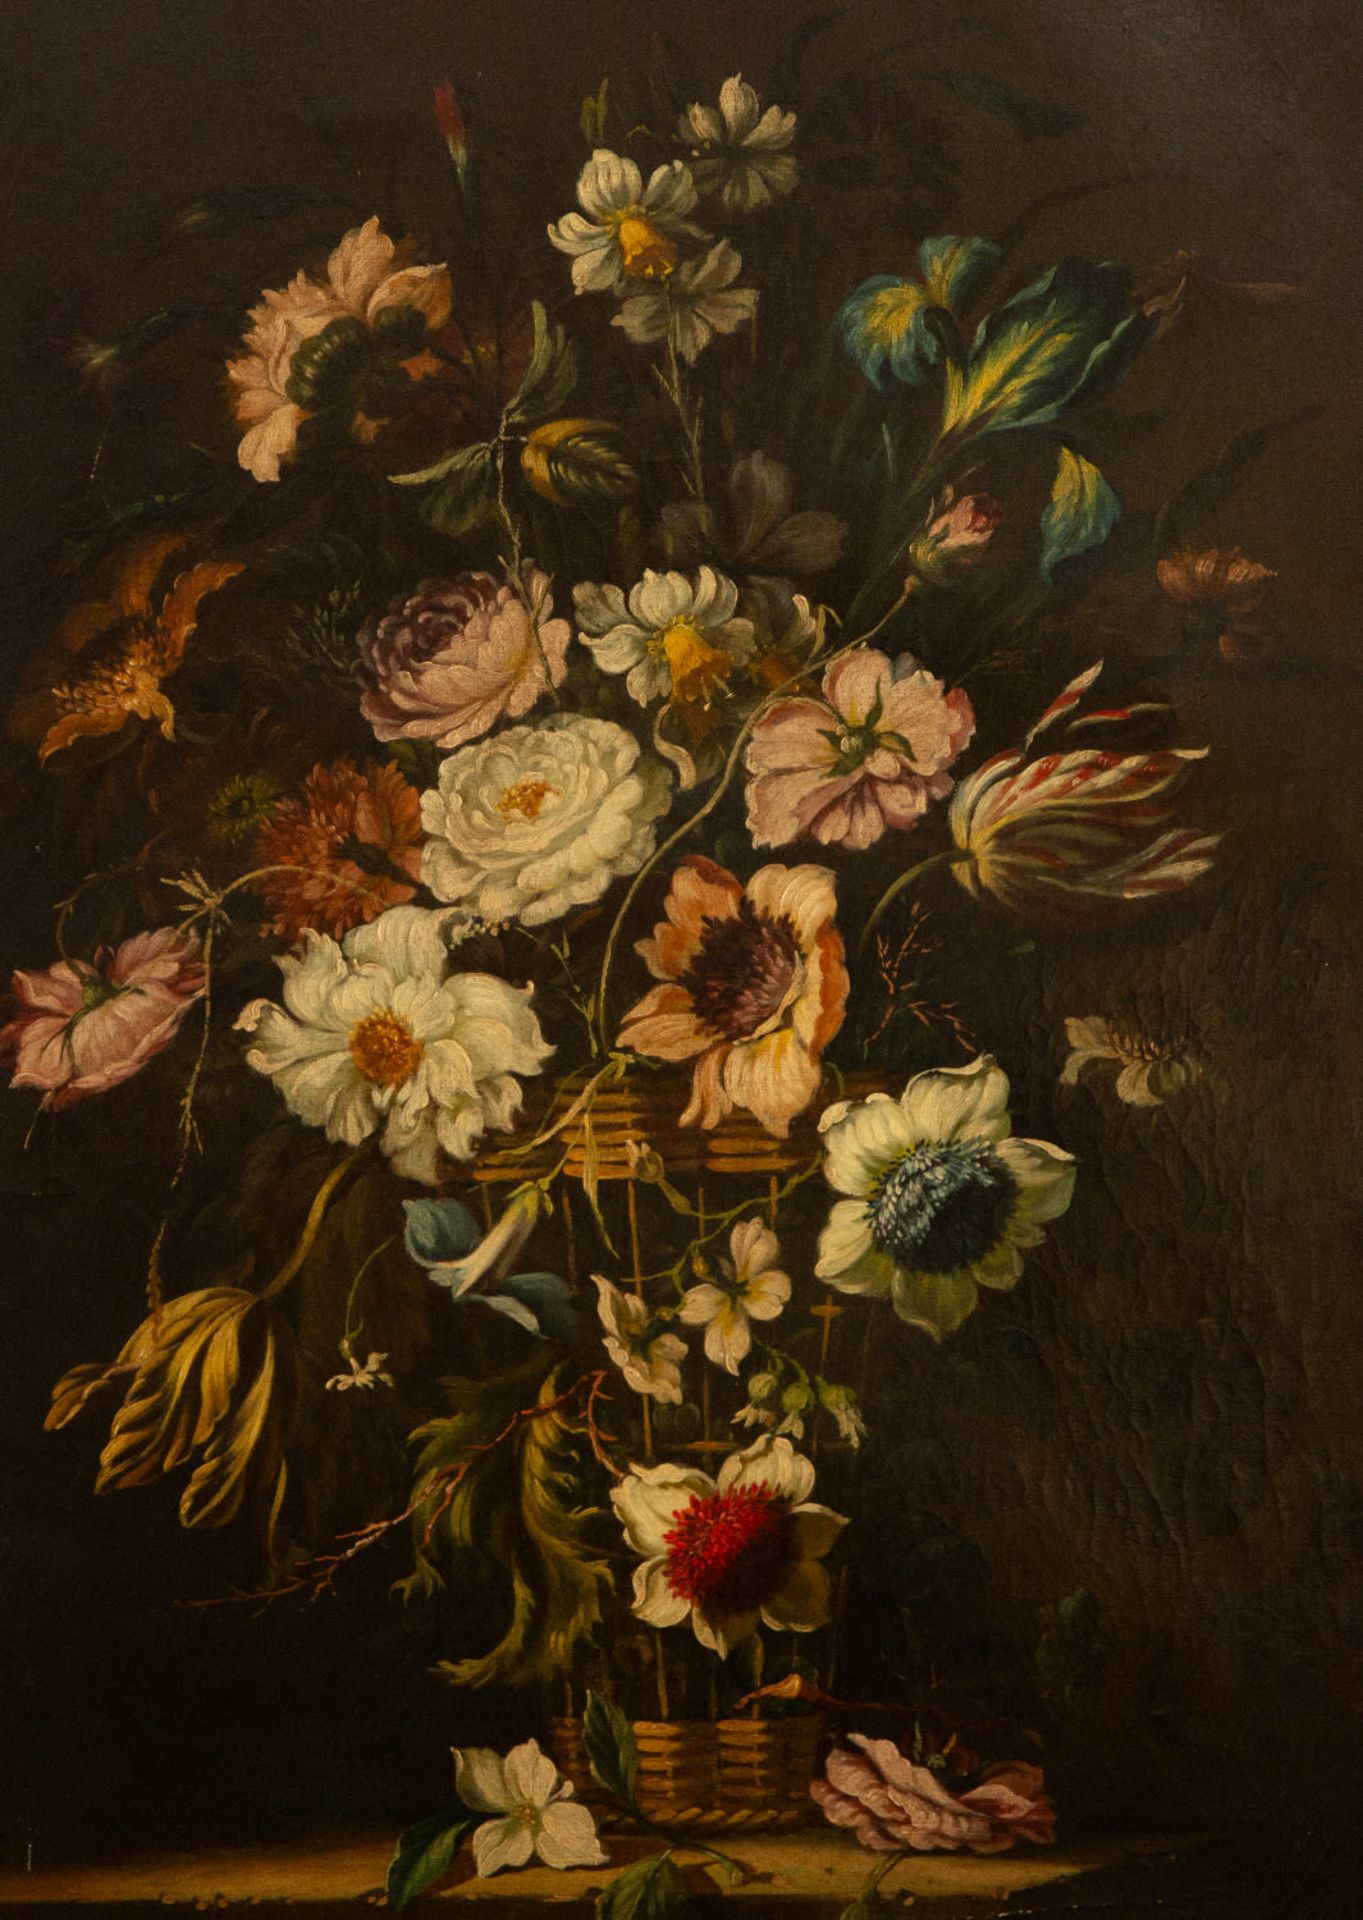 Still life of Flowers on canvas, Belgian or French school, signed J. Rimont, 19th century - Bild 2 aus 4